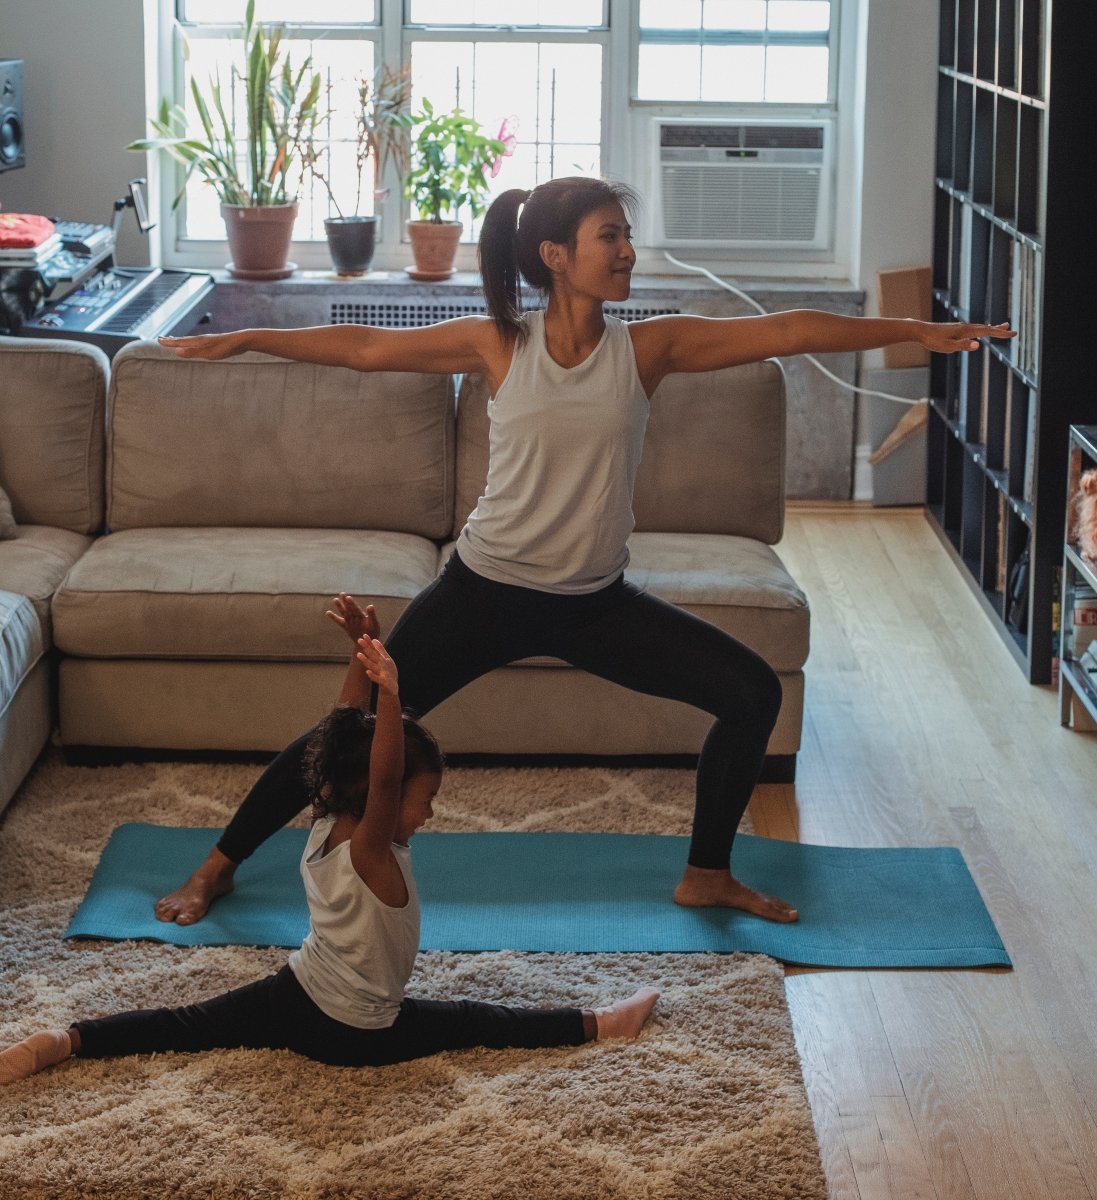 3 At-Home Workout Ideas for Busy Moms On The Go - Style Loft Activewear